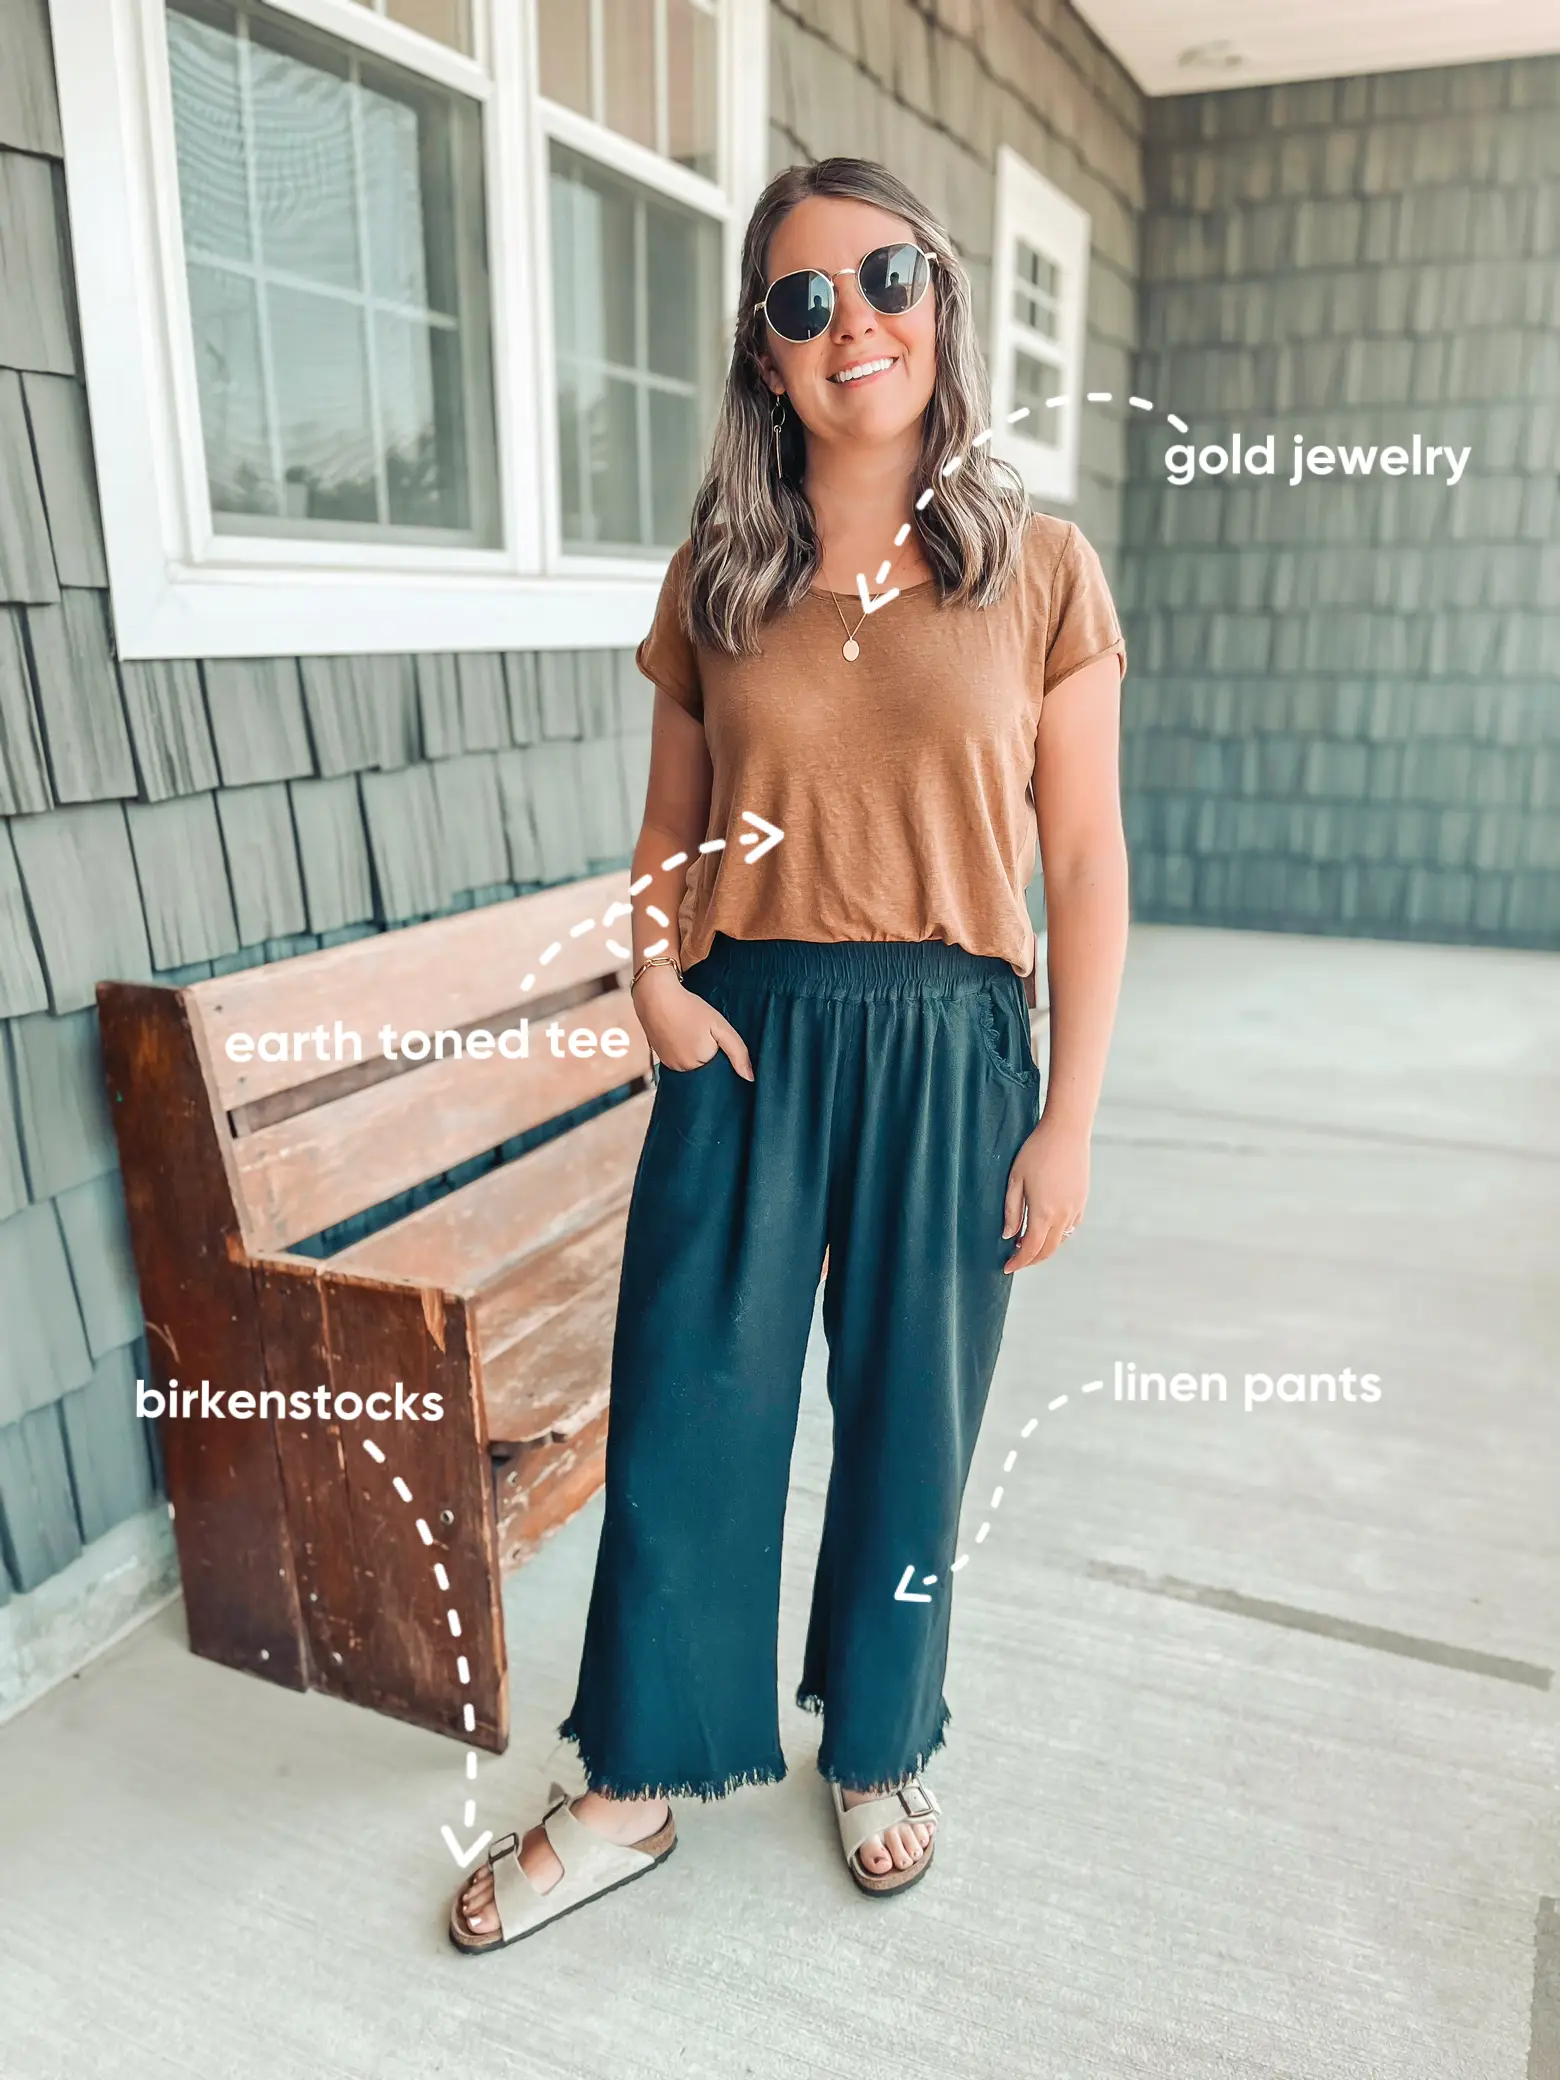 CASUAL CHURCH OUTFIT, linen pants outfit, Gallery posted by MarissaNewvine